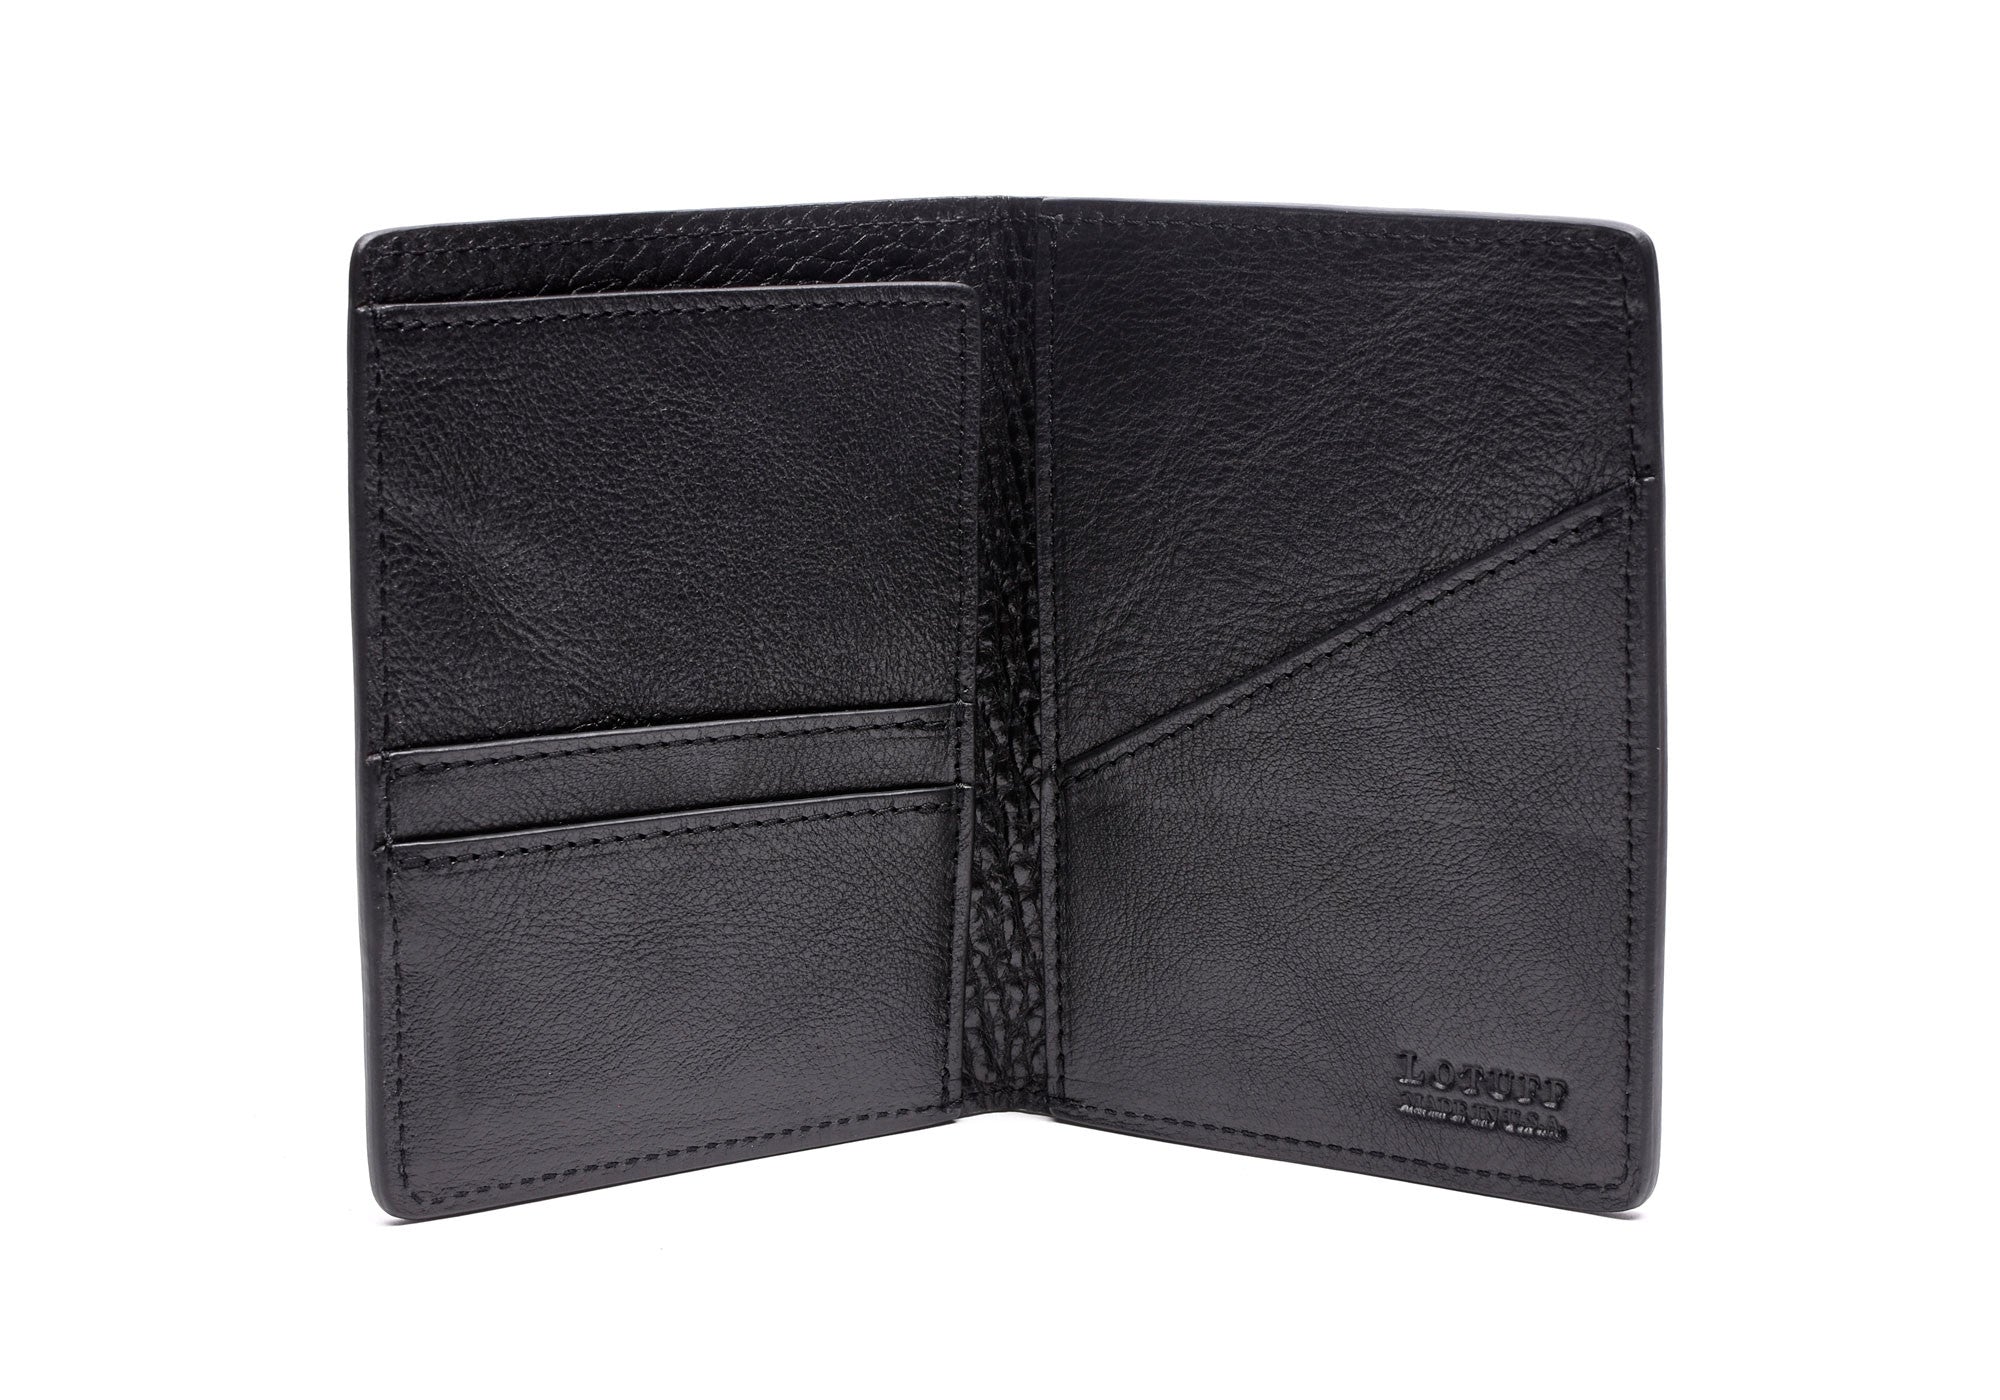 Open Front View of Leather Passport Wallet Black